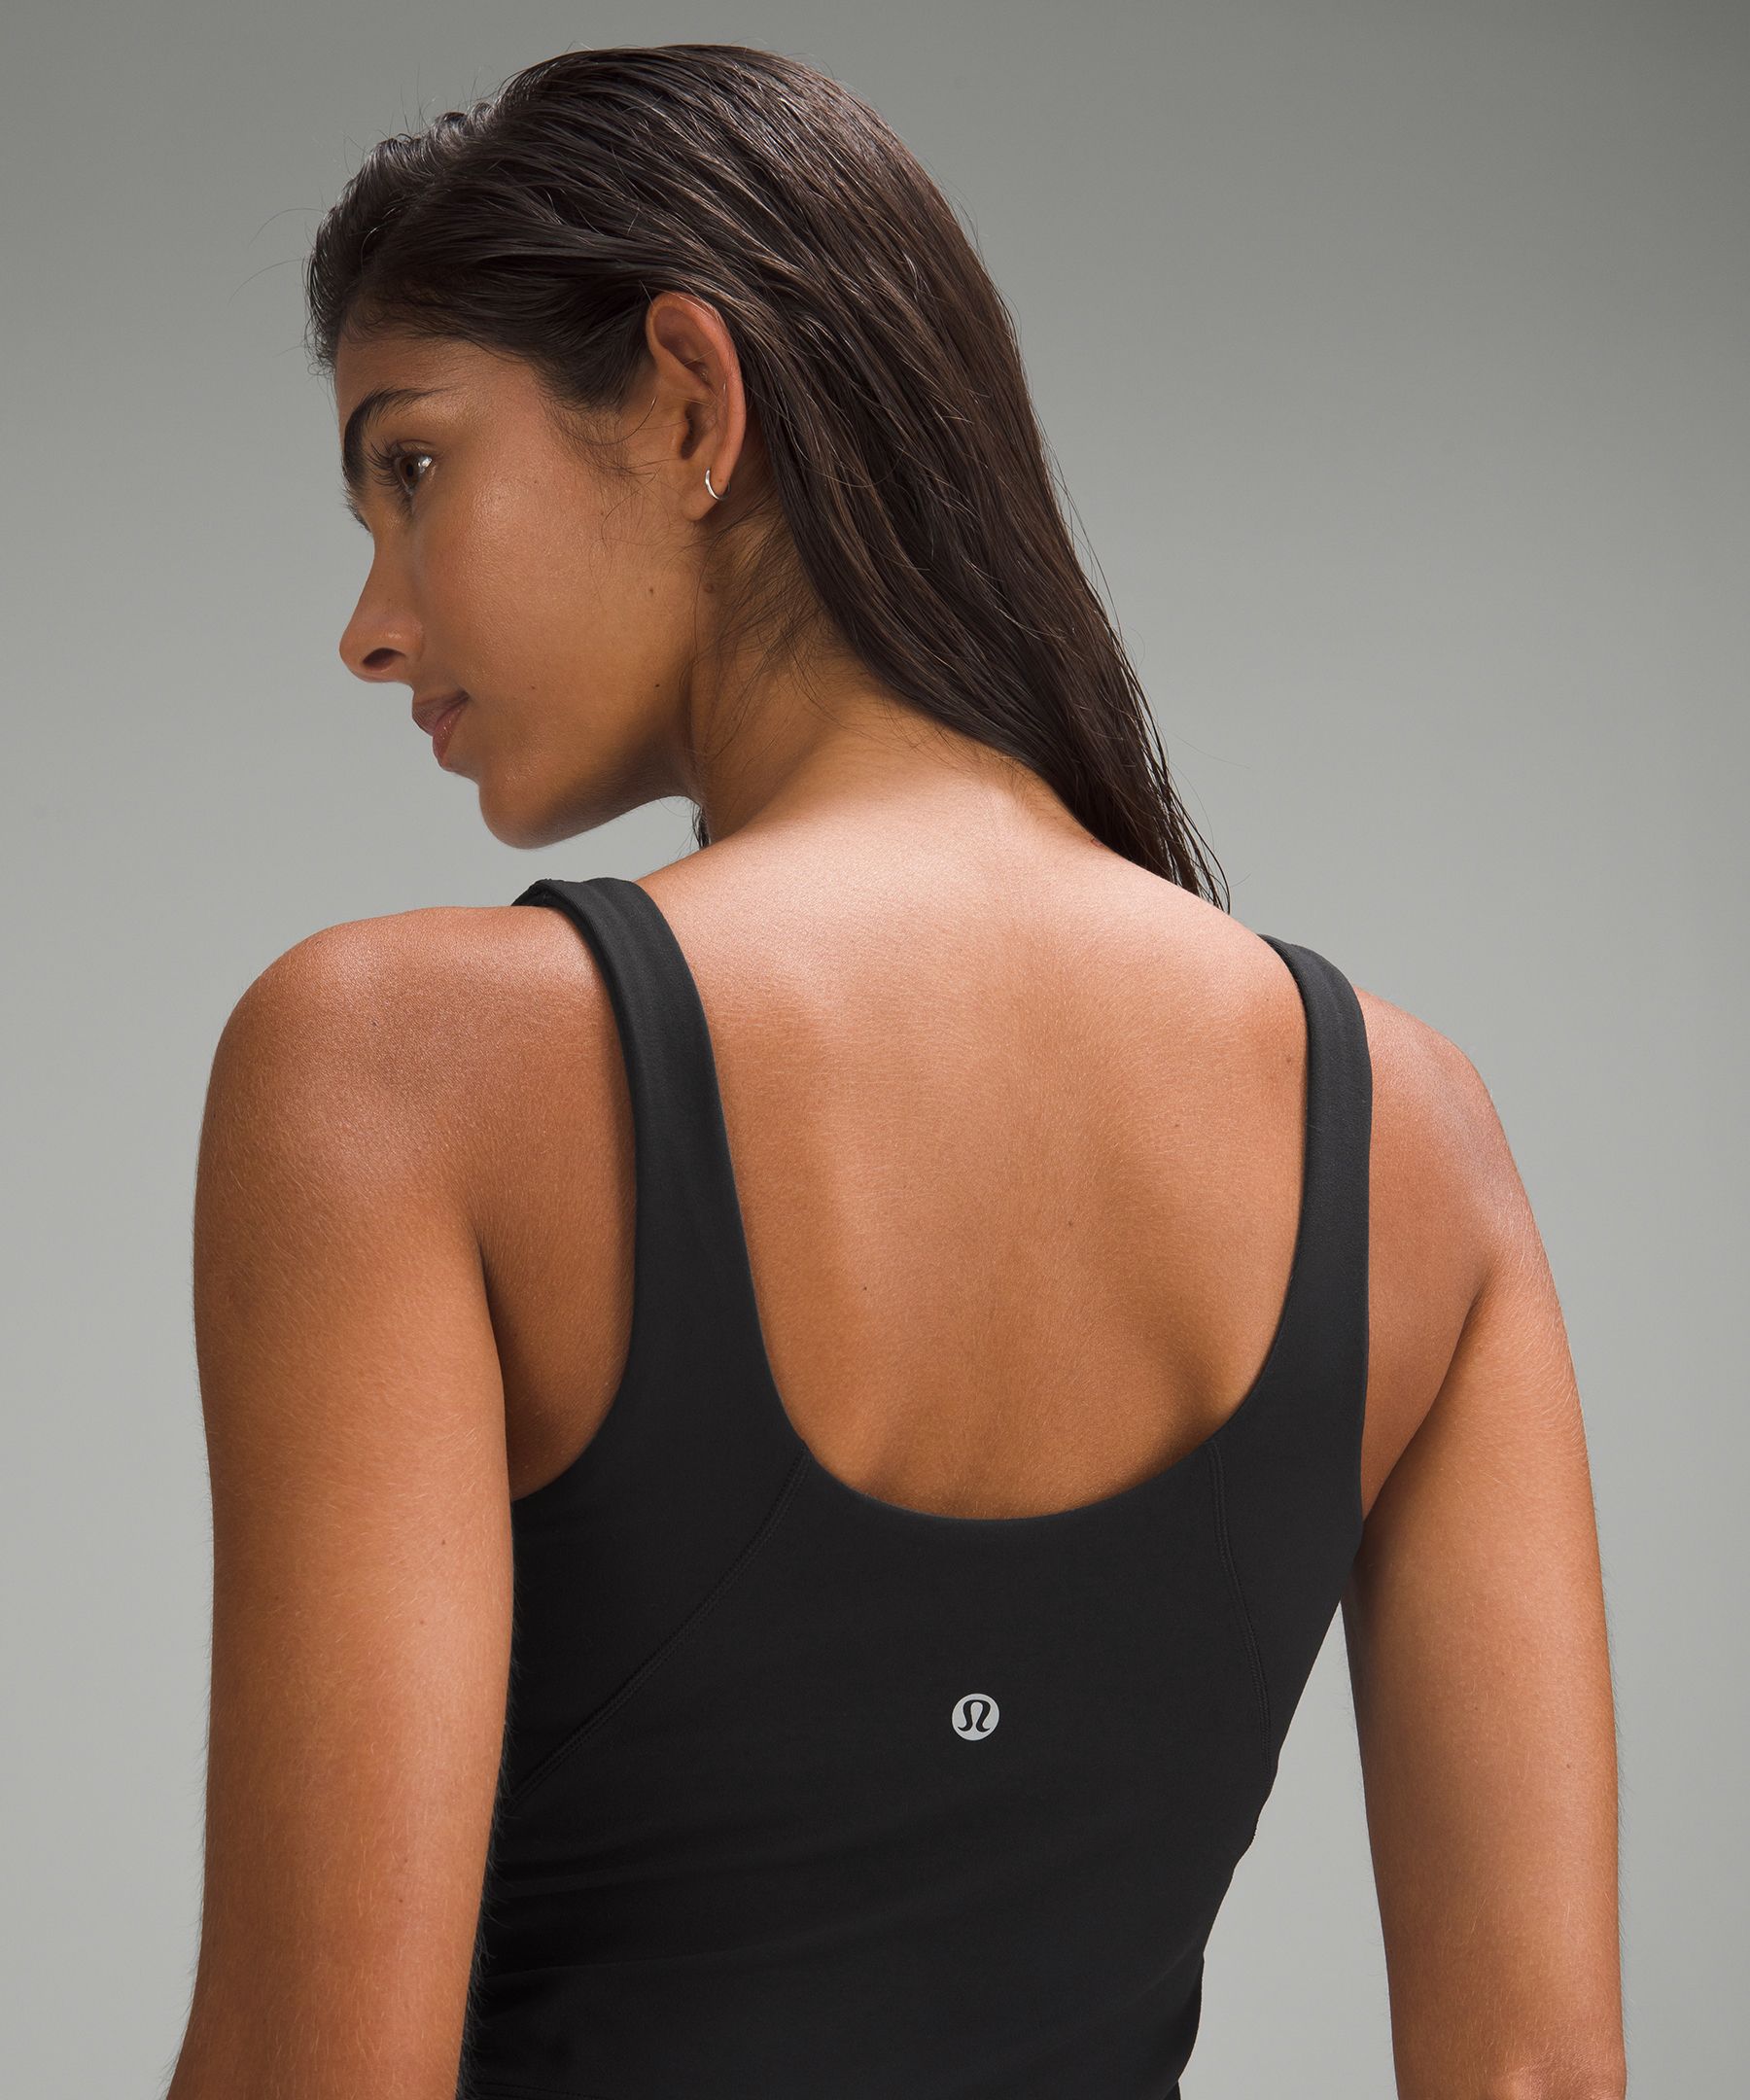 Lululemon ALIGN TANK SIZE 2 Black - $113 (24% Off Retail) New With Tags -  From Kat